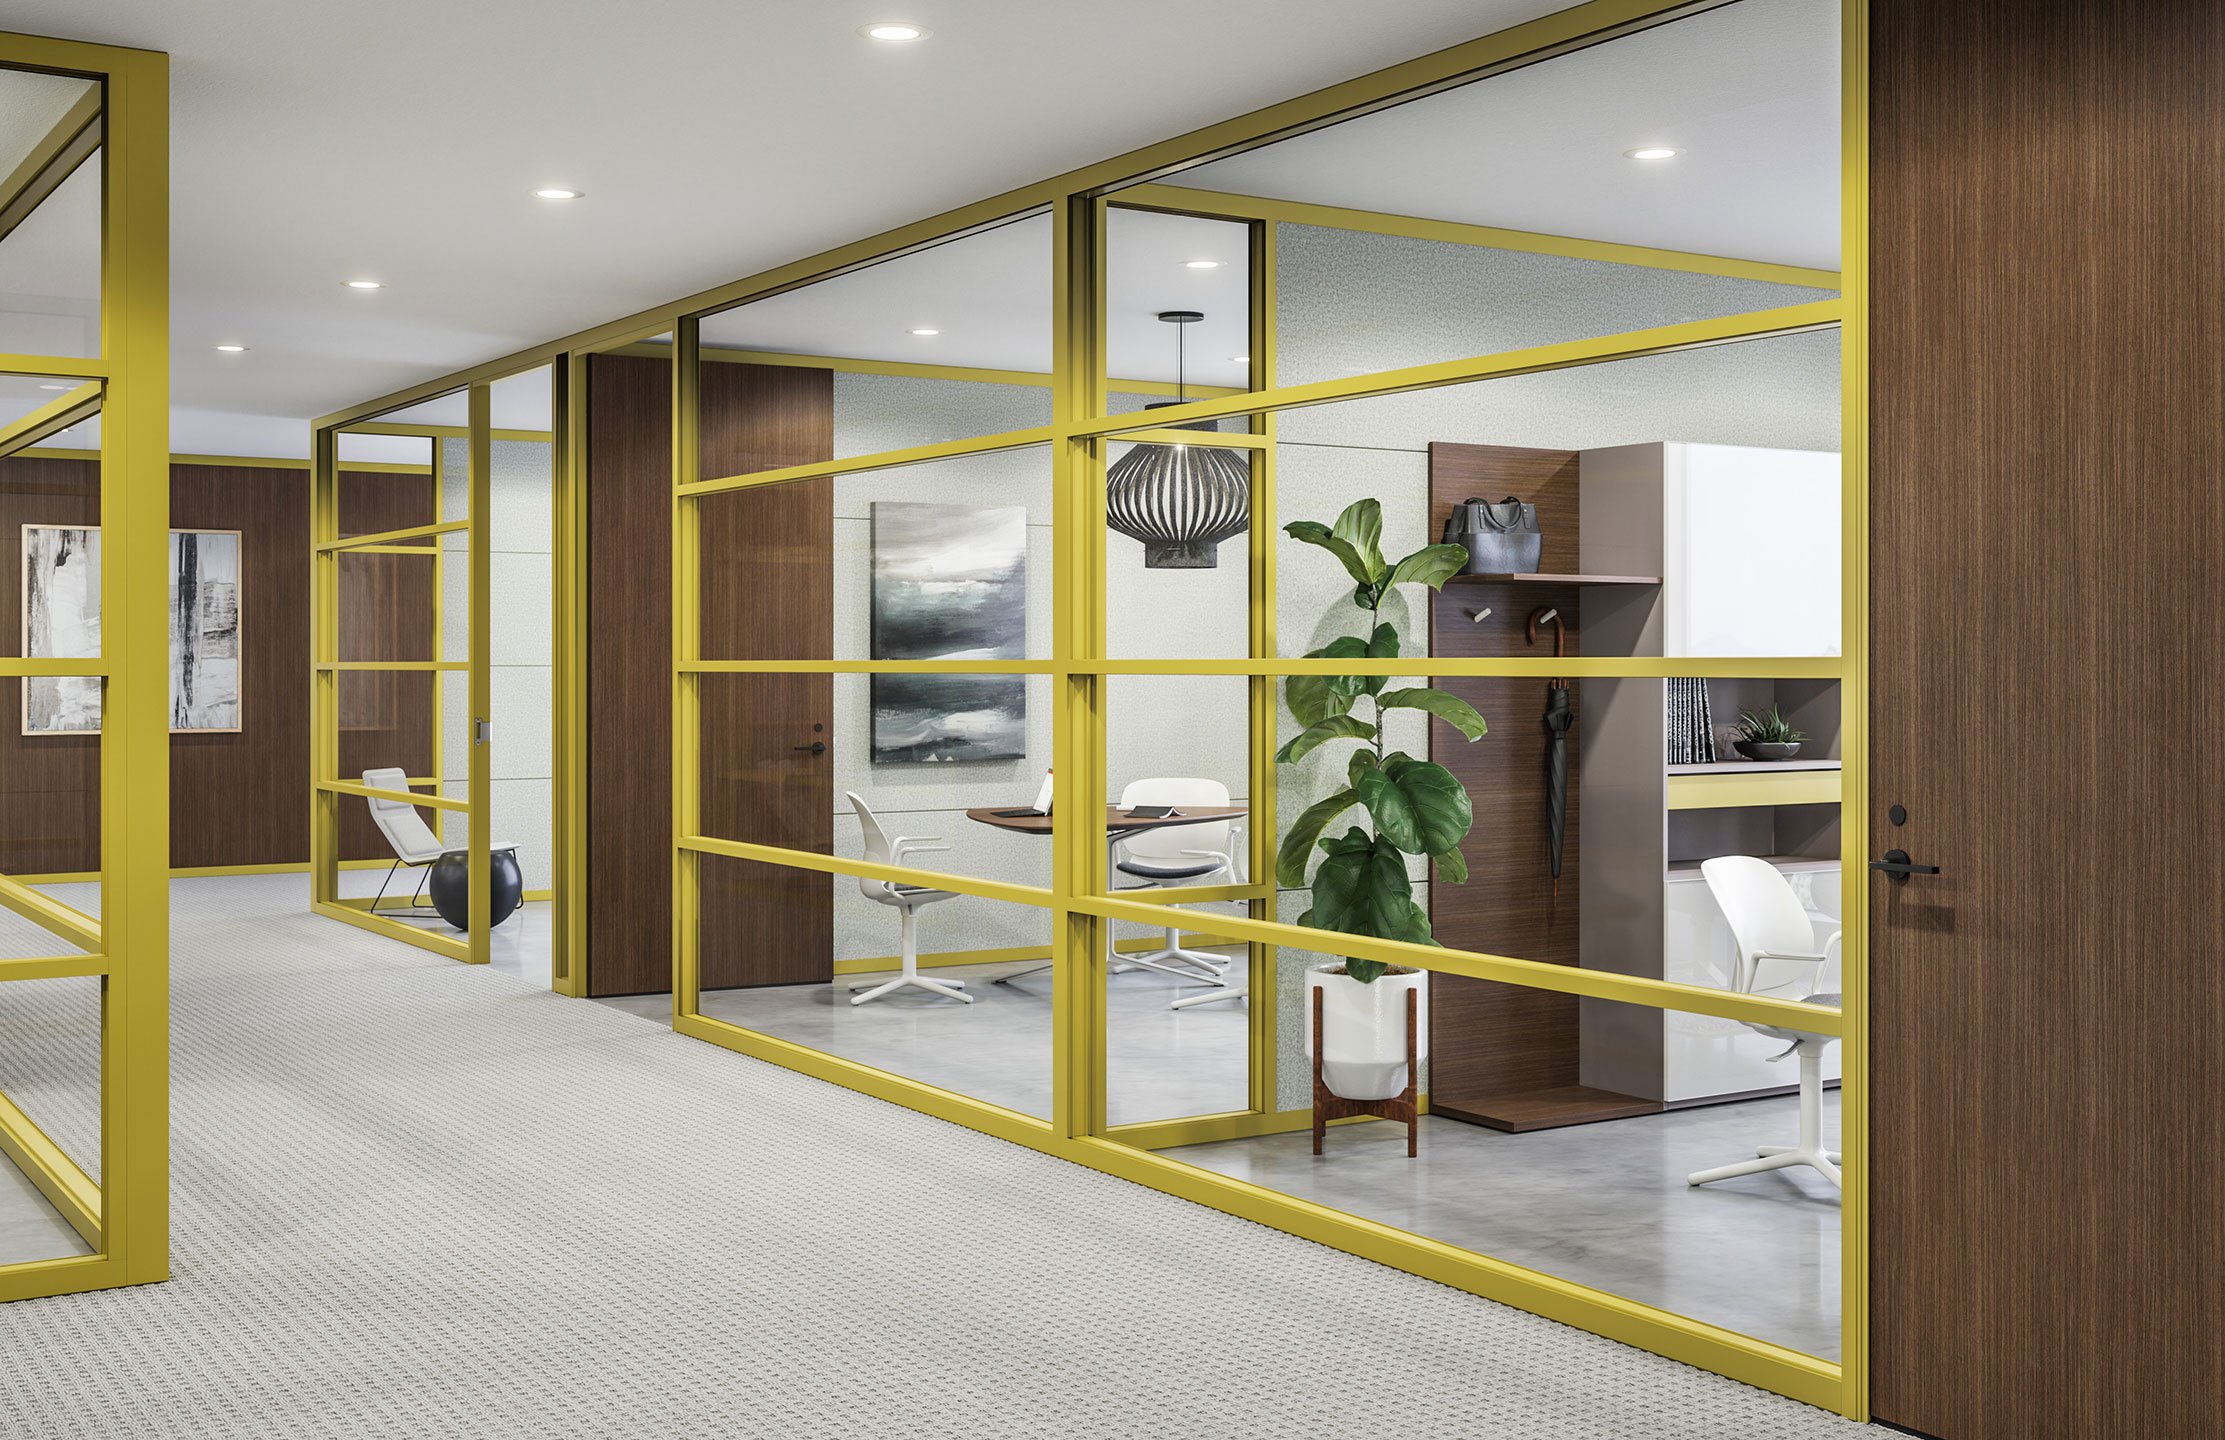 Haworth Trivati Wall in office hallway making multiple private work spaces with yellow trim and white chairs and grey rug in office